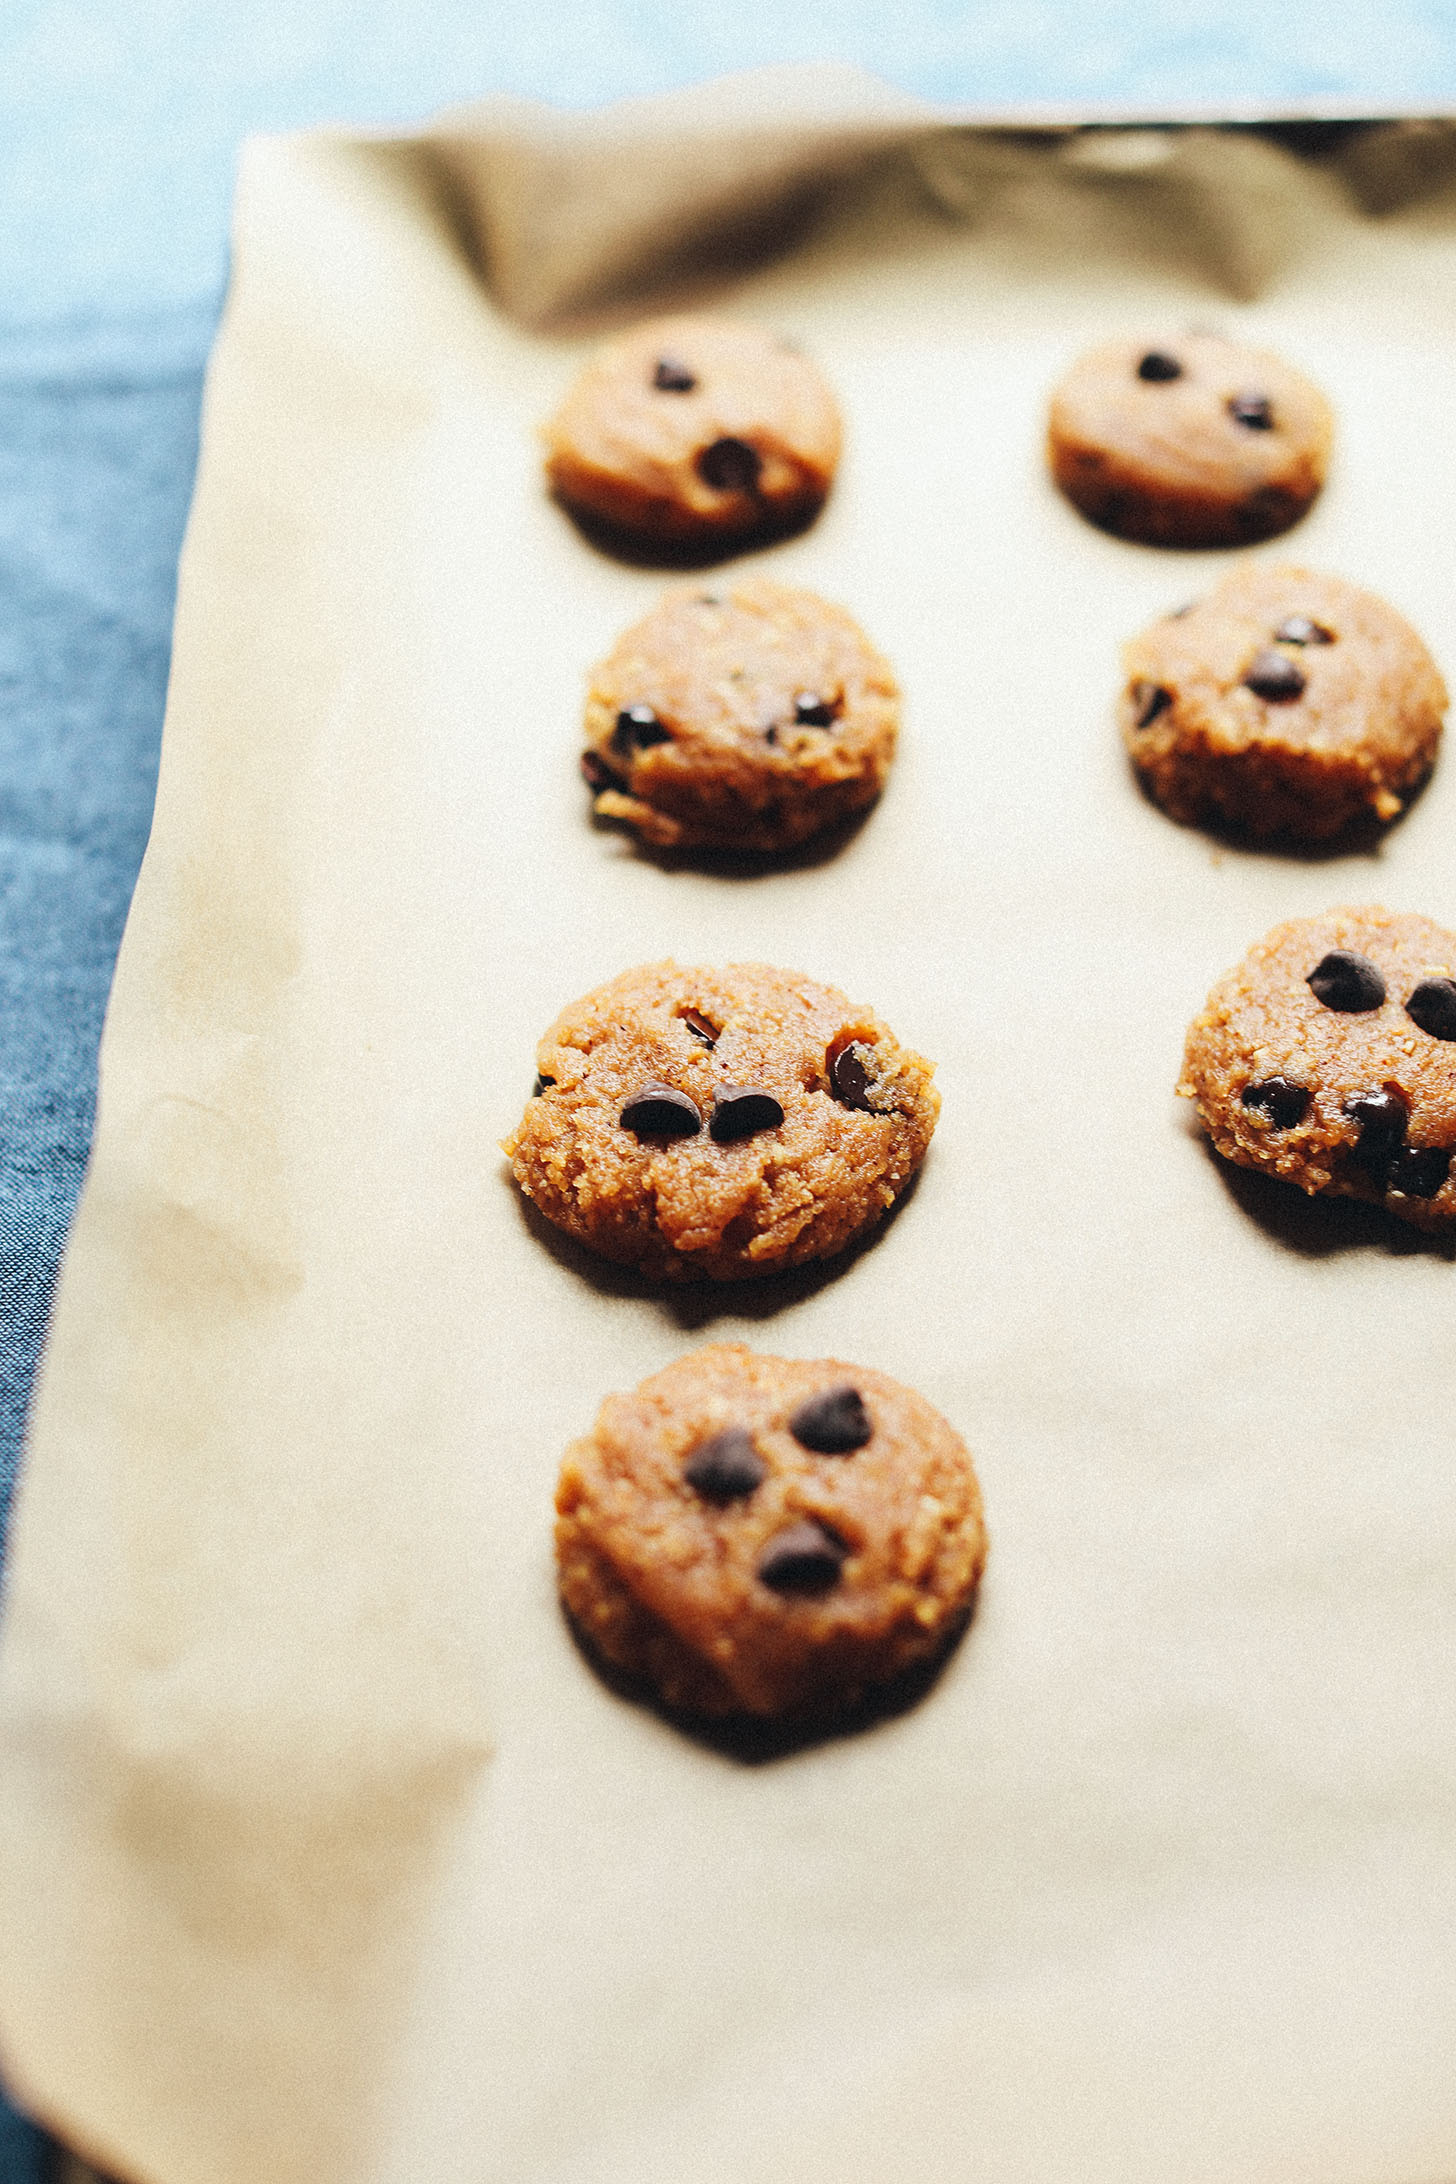 Parchment lined baking sheet with gluten-free vegan Almond Butter Chocolate Chip Cookies